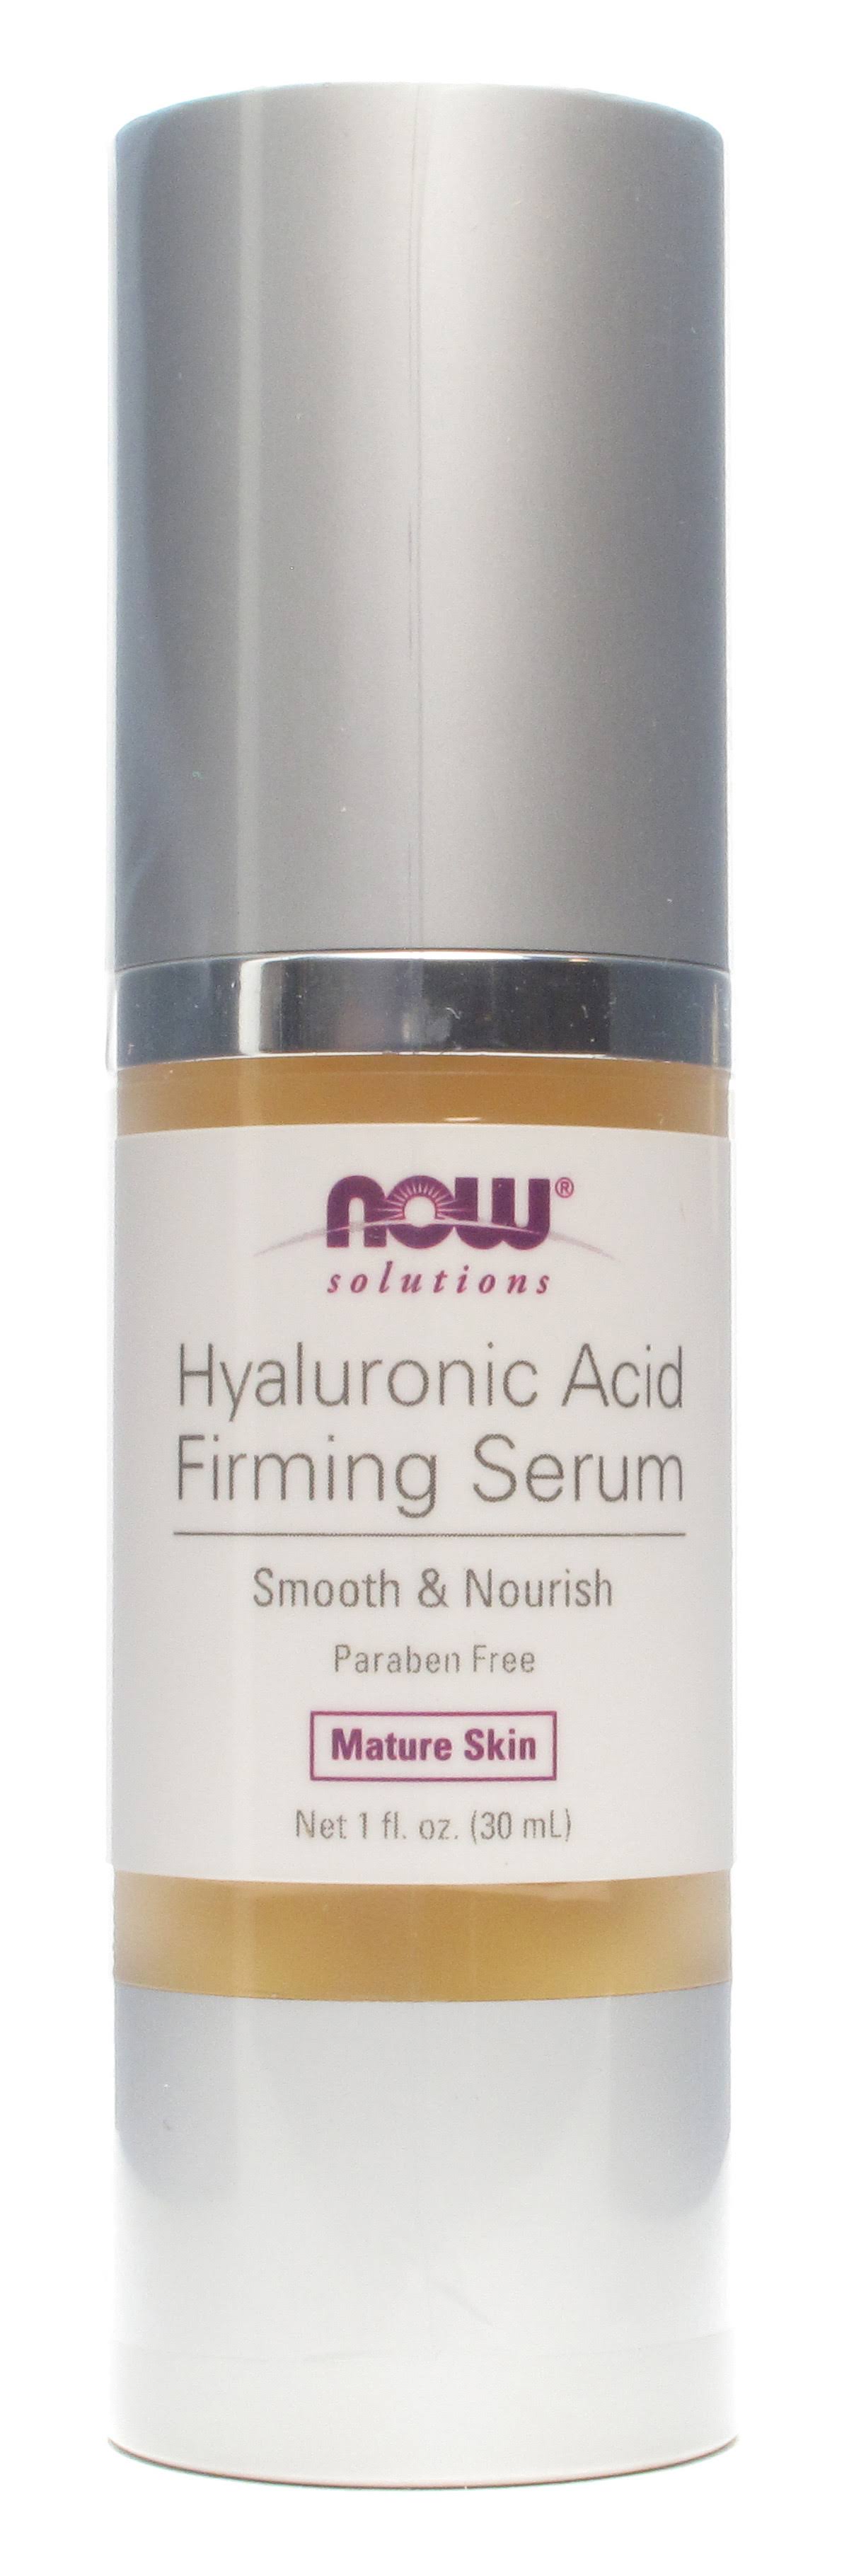 Now Foods Solutions Hyaluronic Acid Firming Serum - 1oz